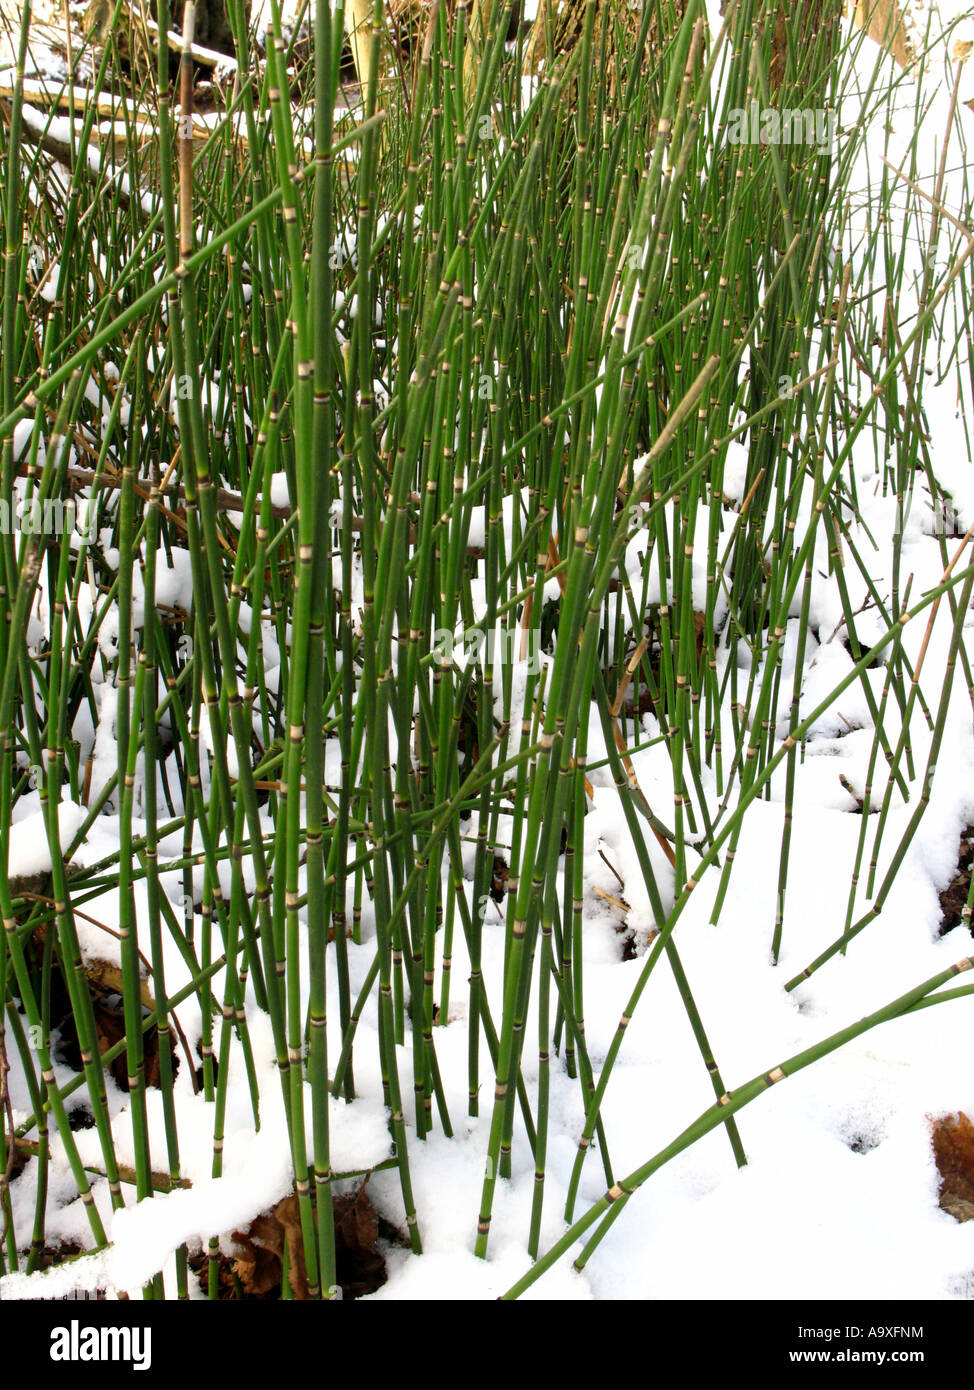 rough horsetail, scouring-rush (Equisetum hyemale), sprouts in winter with snow Stock Photo